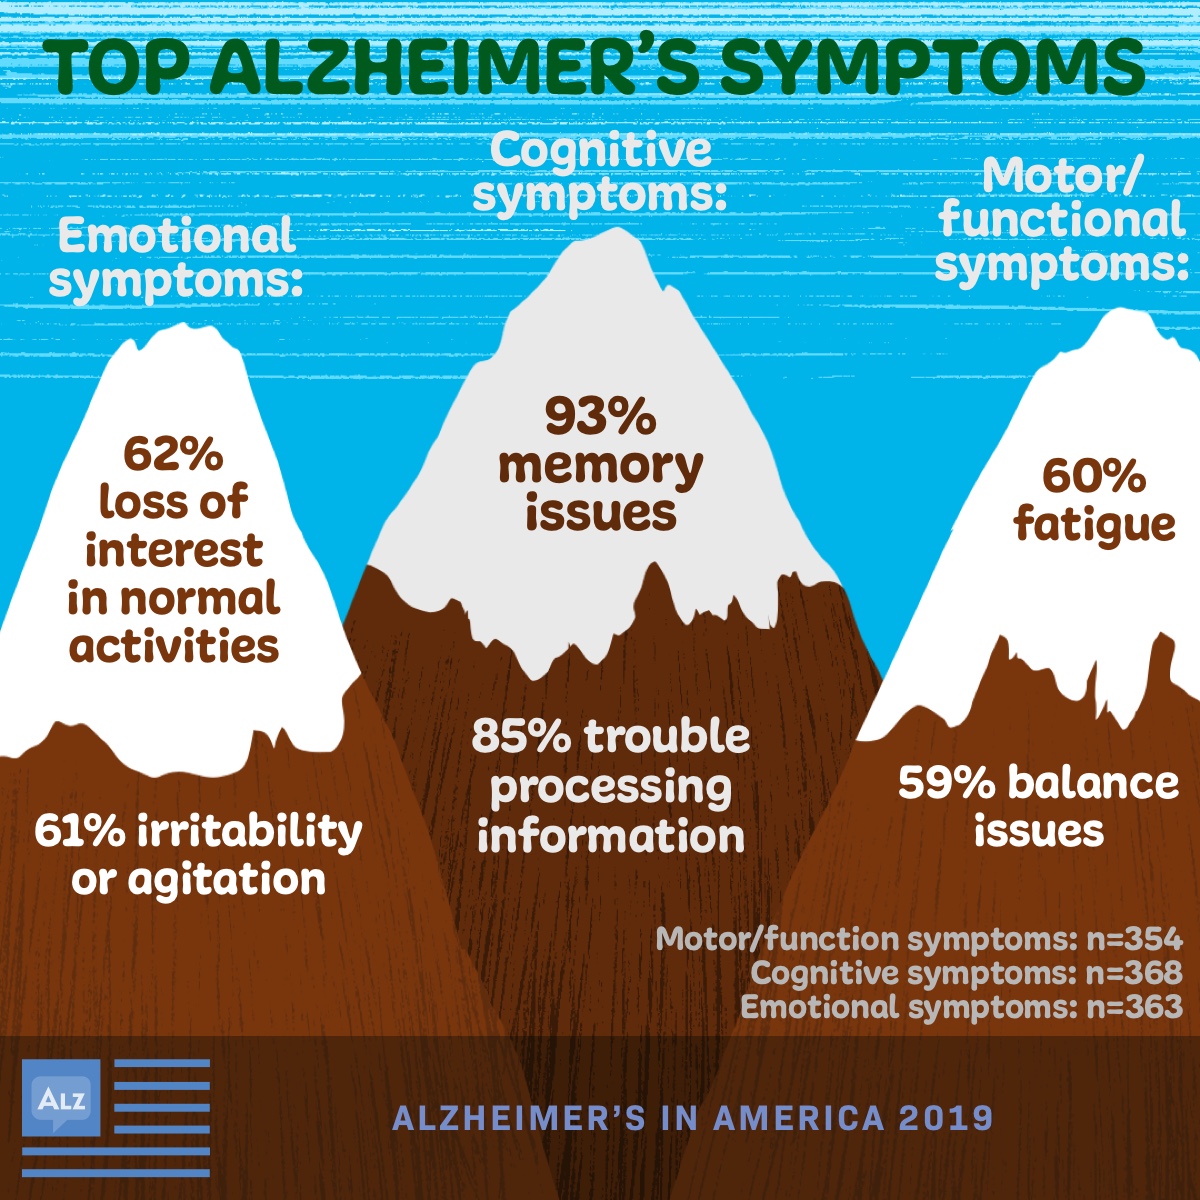 Top Alzheimer’s symptoms reported by respondants. 85% have trouble processing information, 59% have balance issues, and 61% experience irritability.